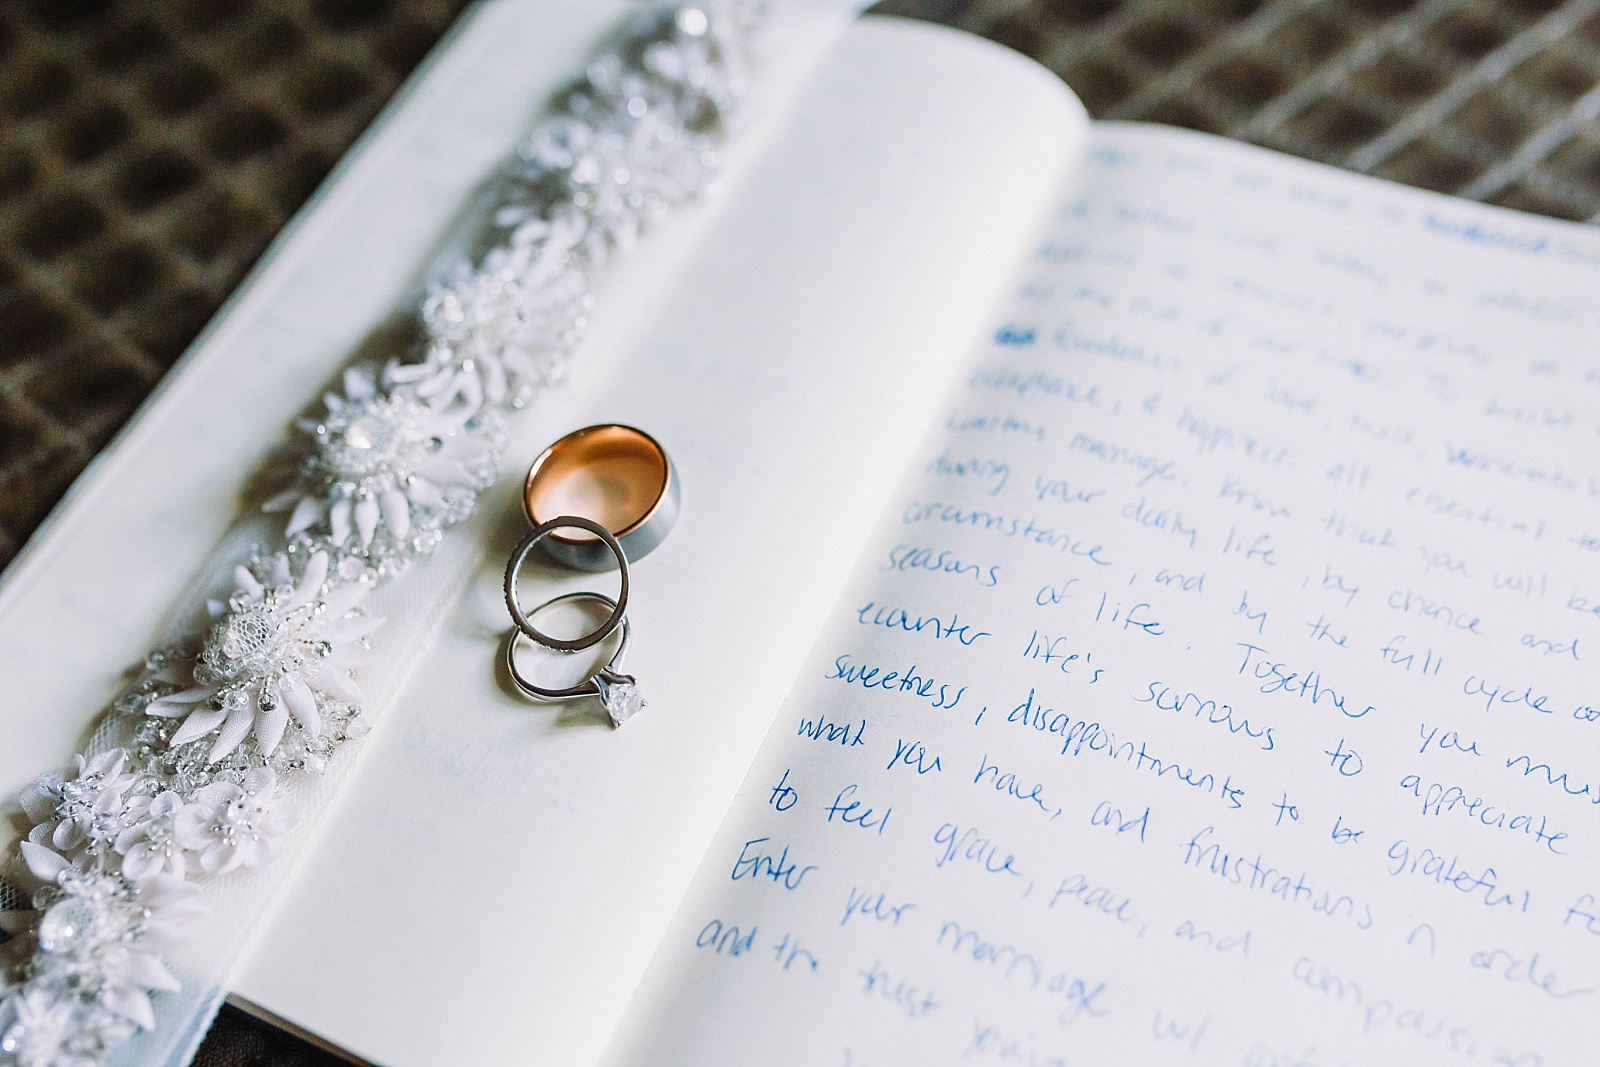 vow books for wedding ceremony with wedding details including bridal belt and rings